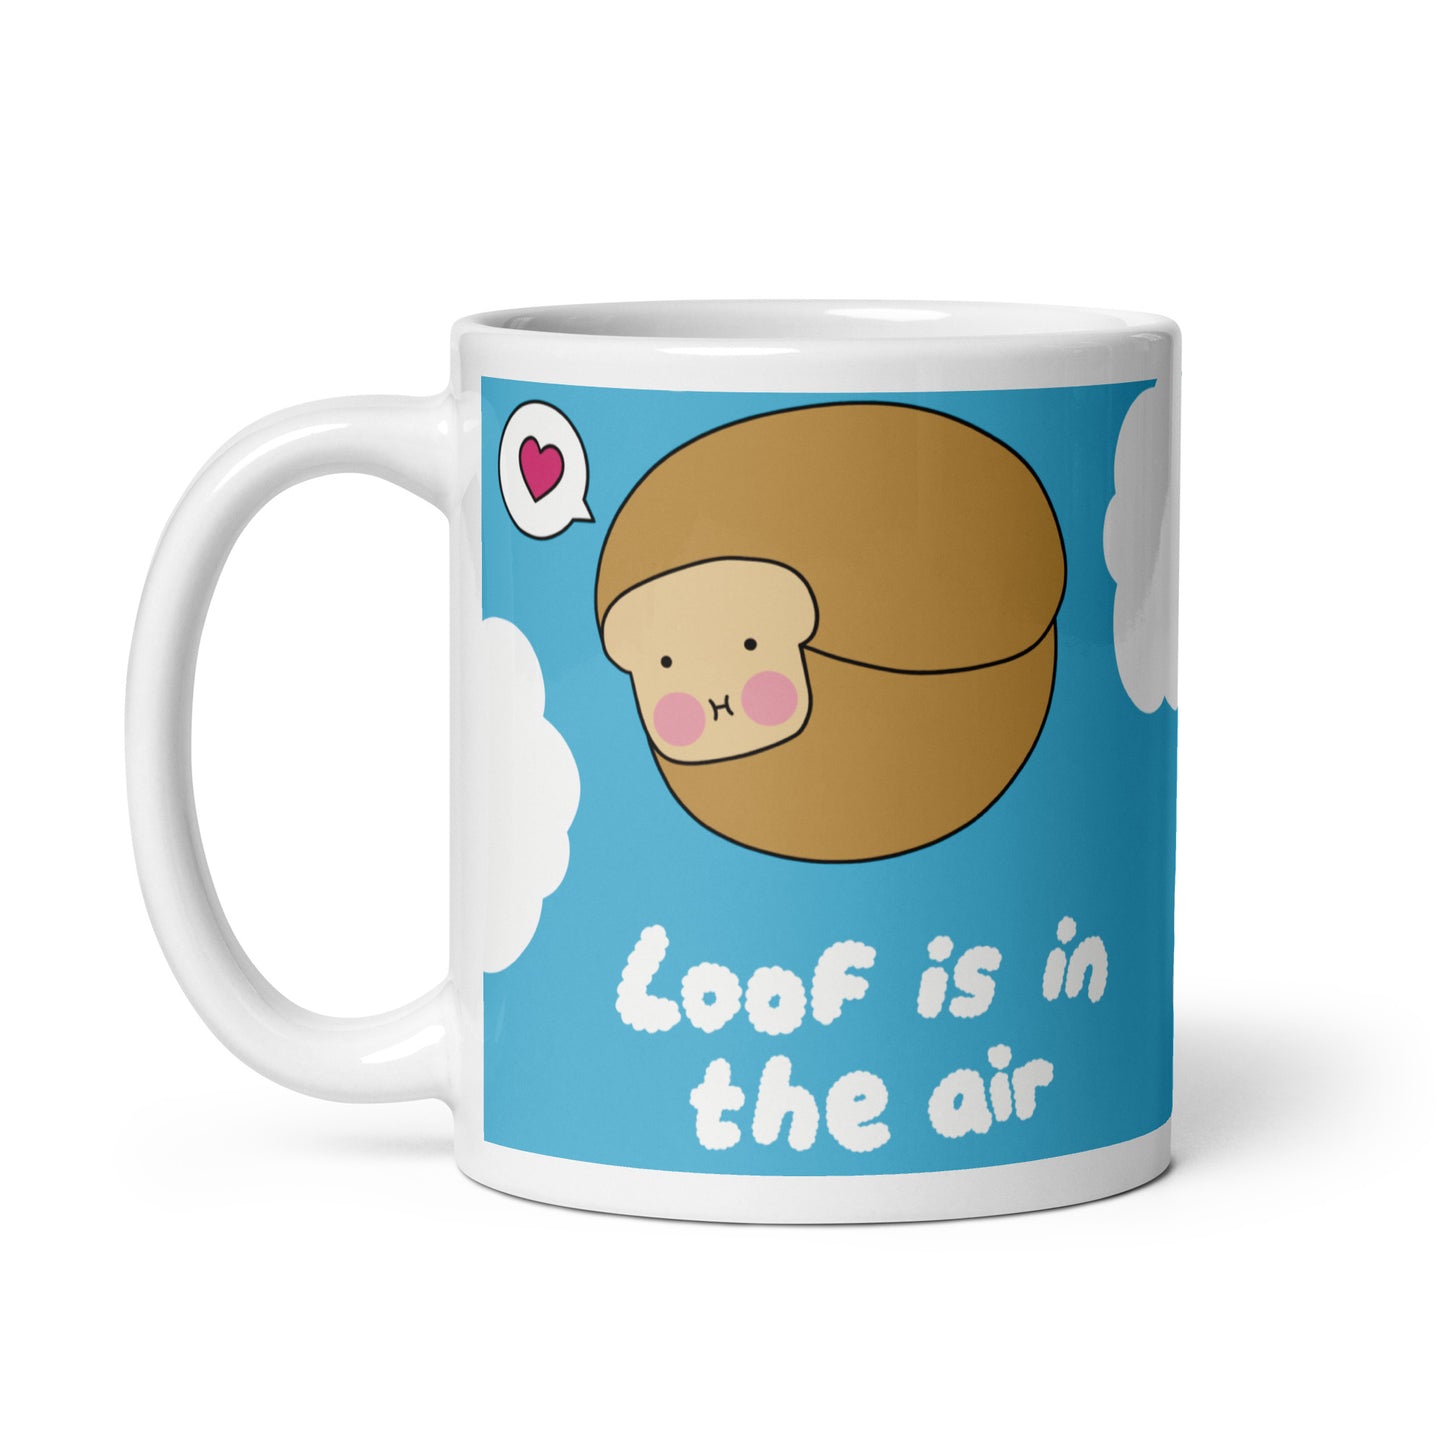 Loof is in the air Mug